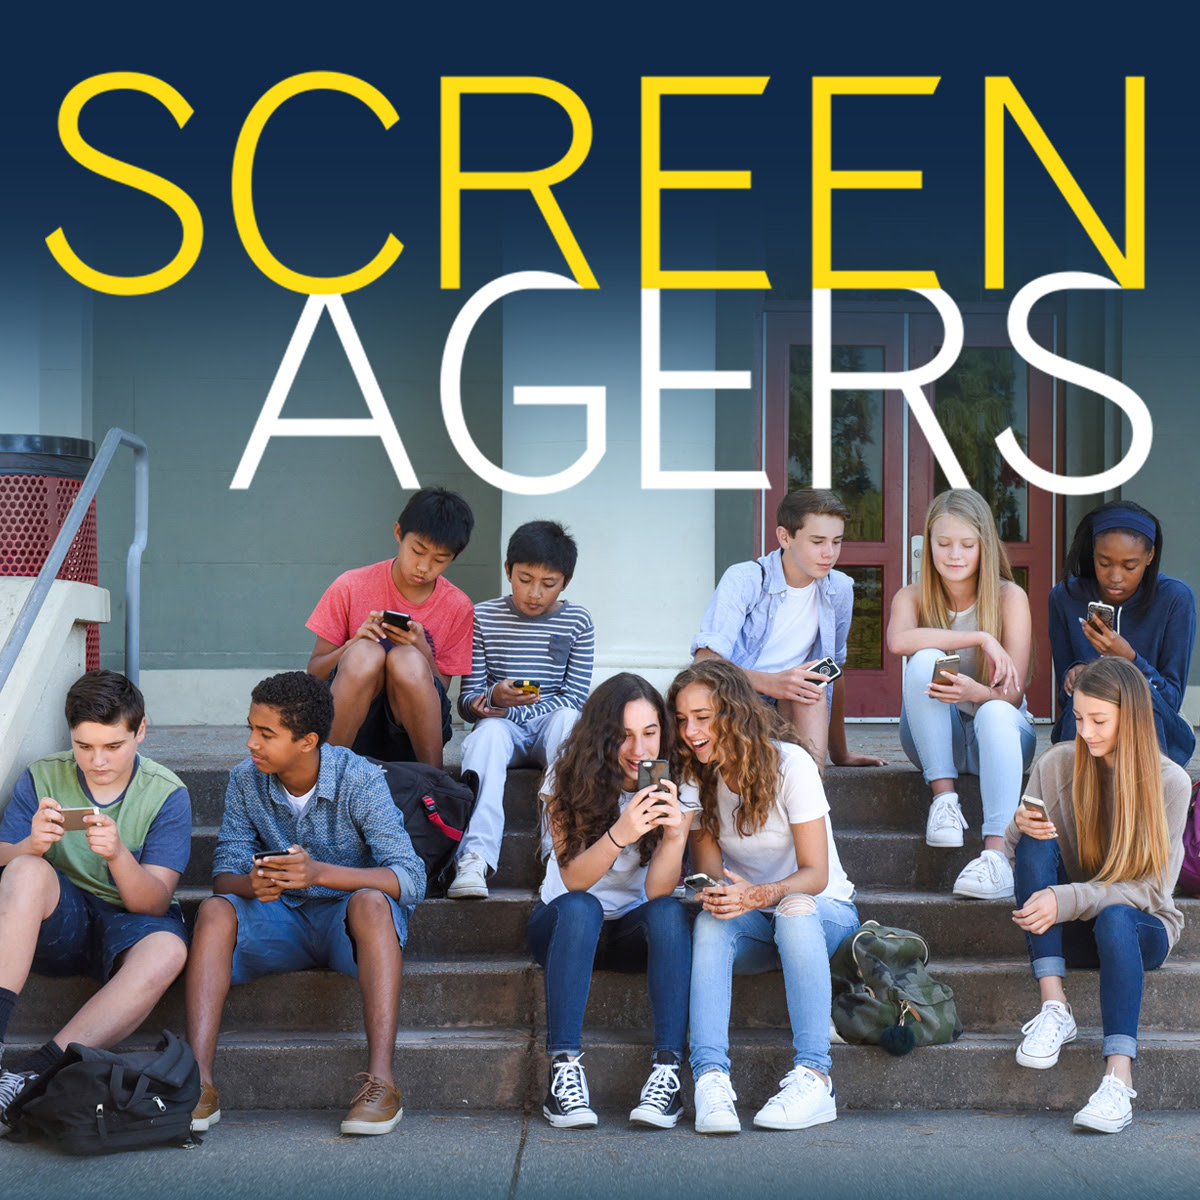 Screenagers Film Presented By Immaculate Conception School - Columbus, Ohio